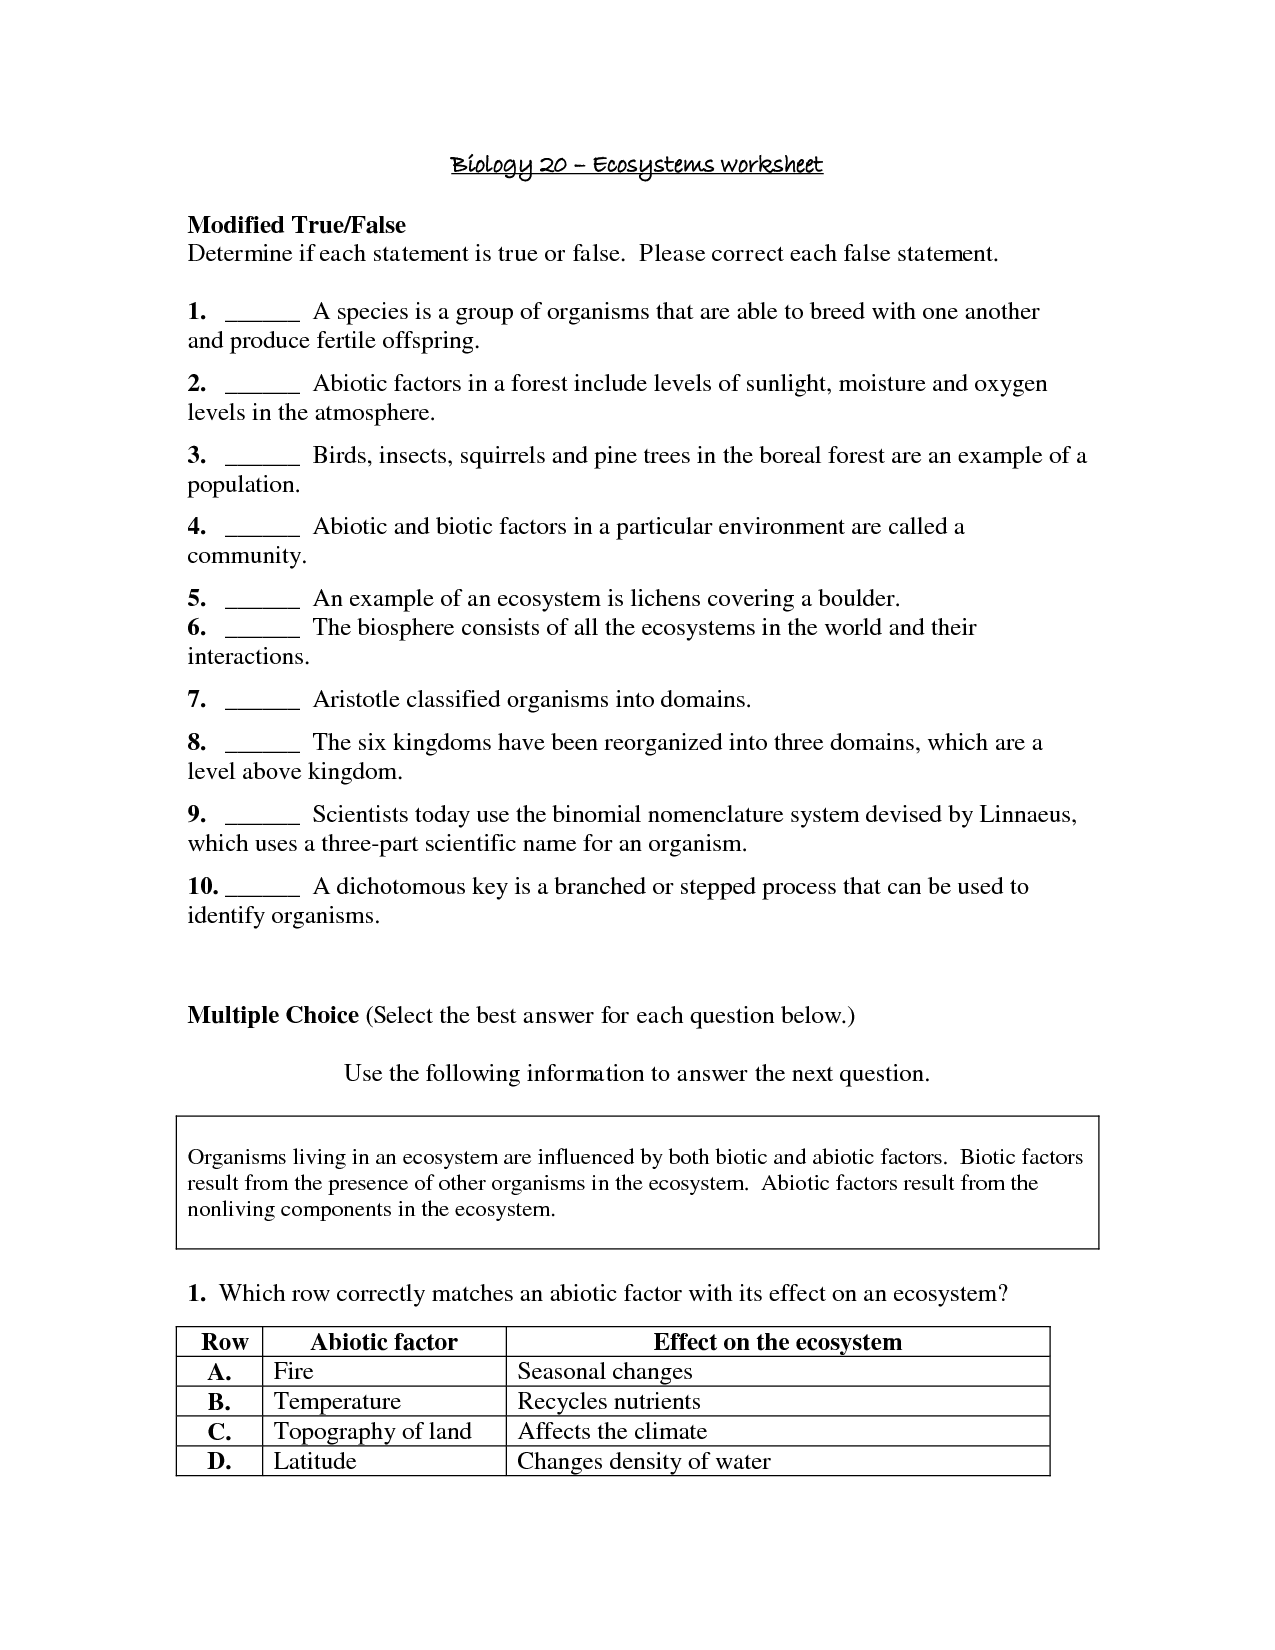 12-best-images-of-communities-and-ecosystems-worksheets-ecosystem-worksheet-answer-key